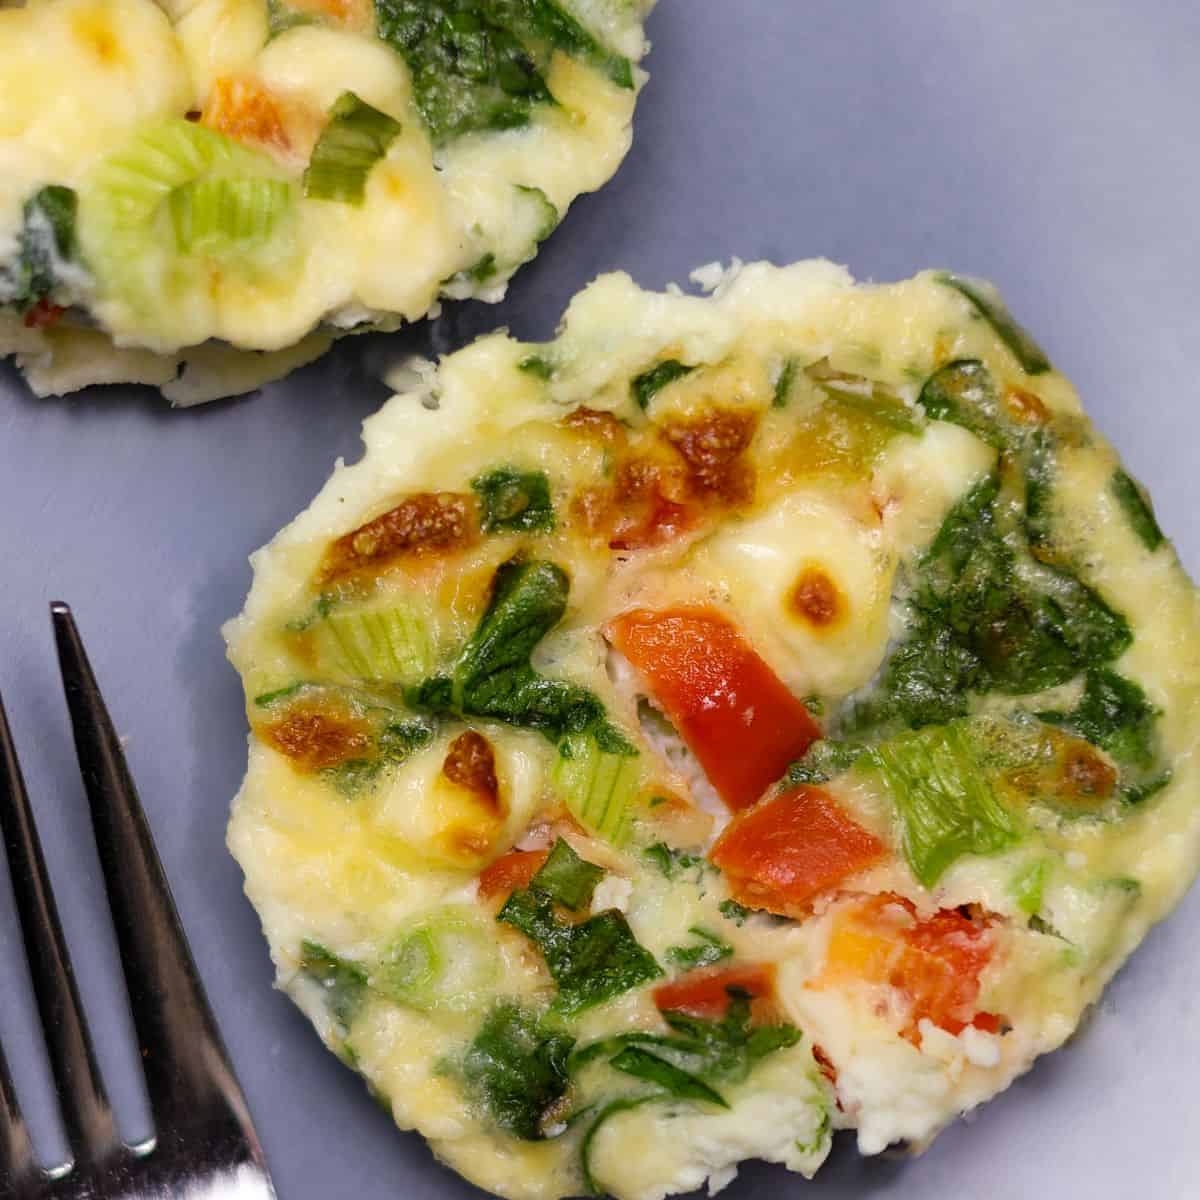 Two egg white bites on a plate with visible chunks of green onion, red bell pepper, and spinach, with a silver fork on the side